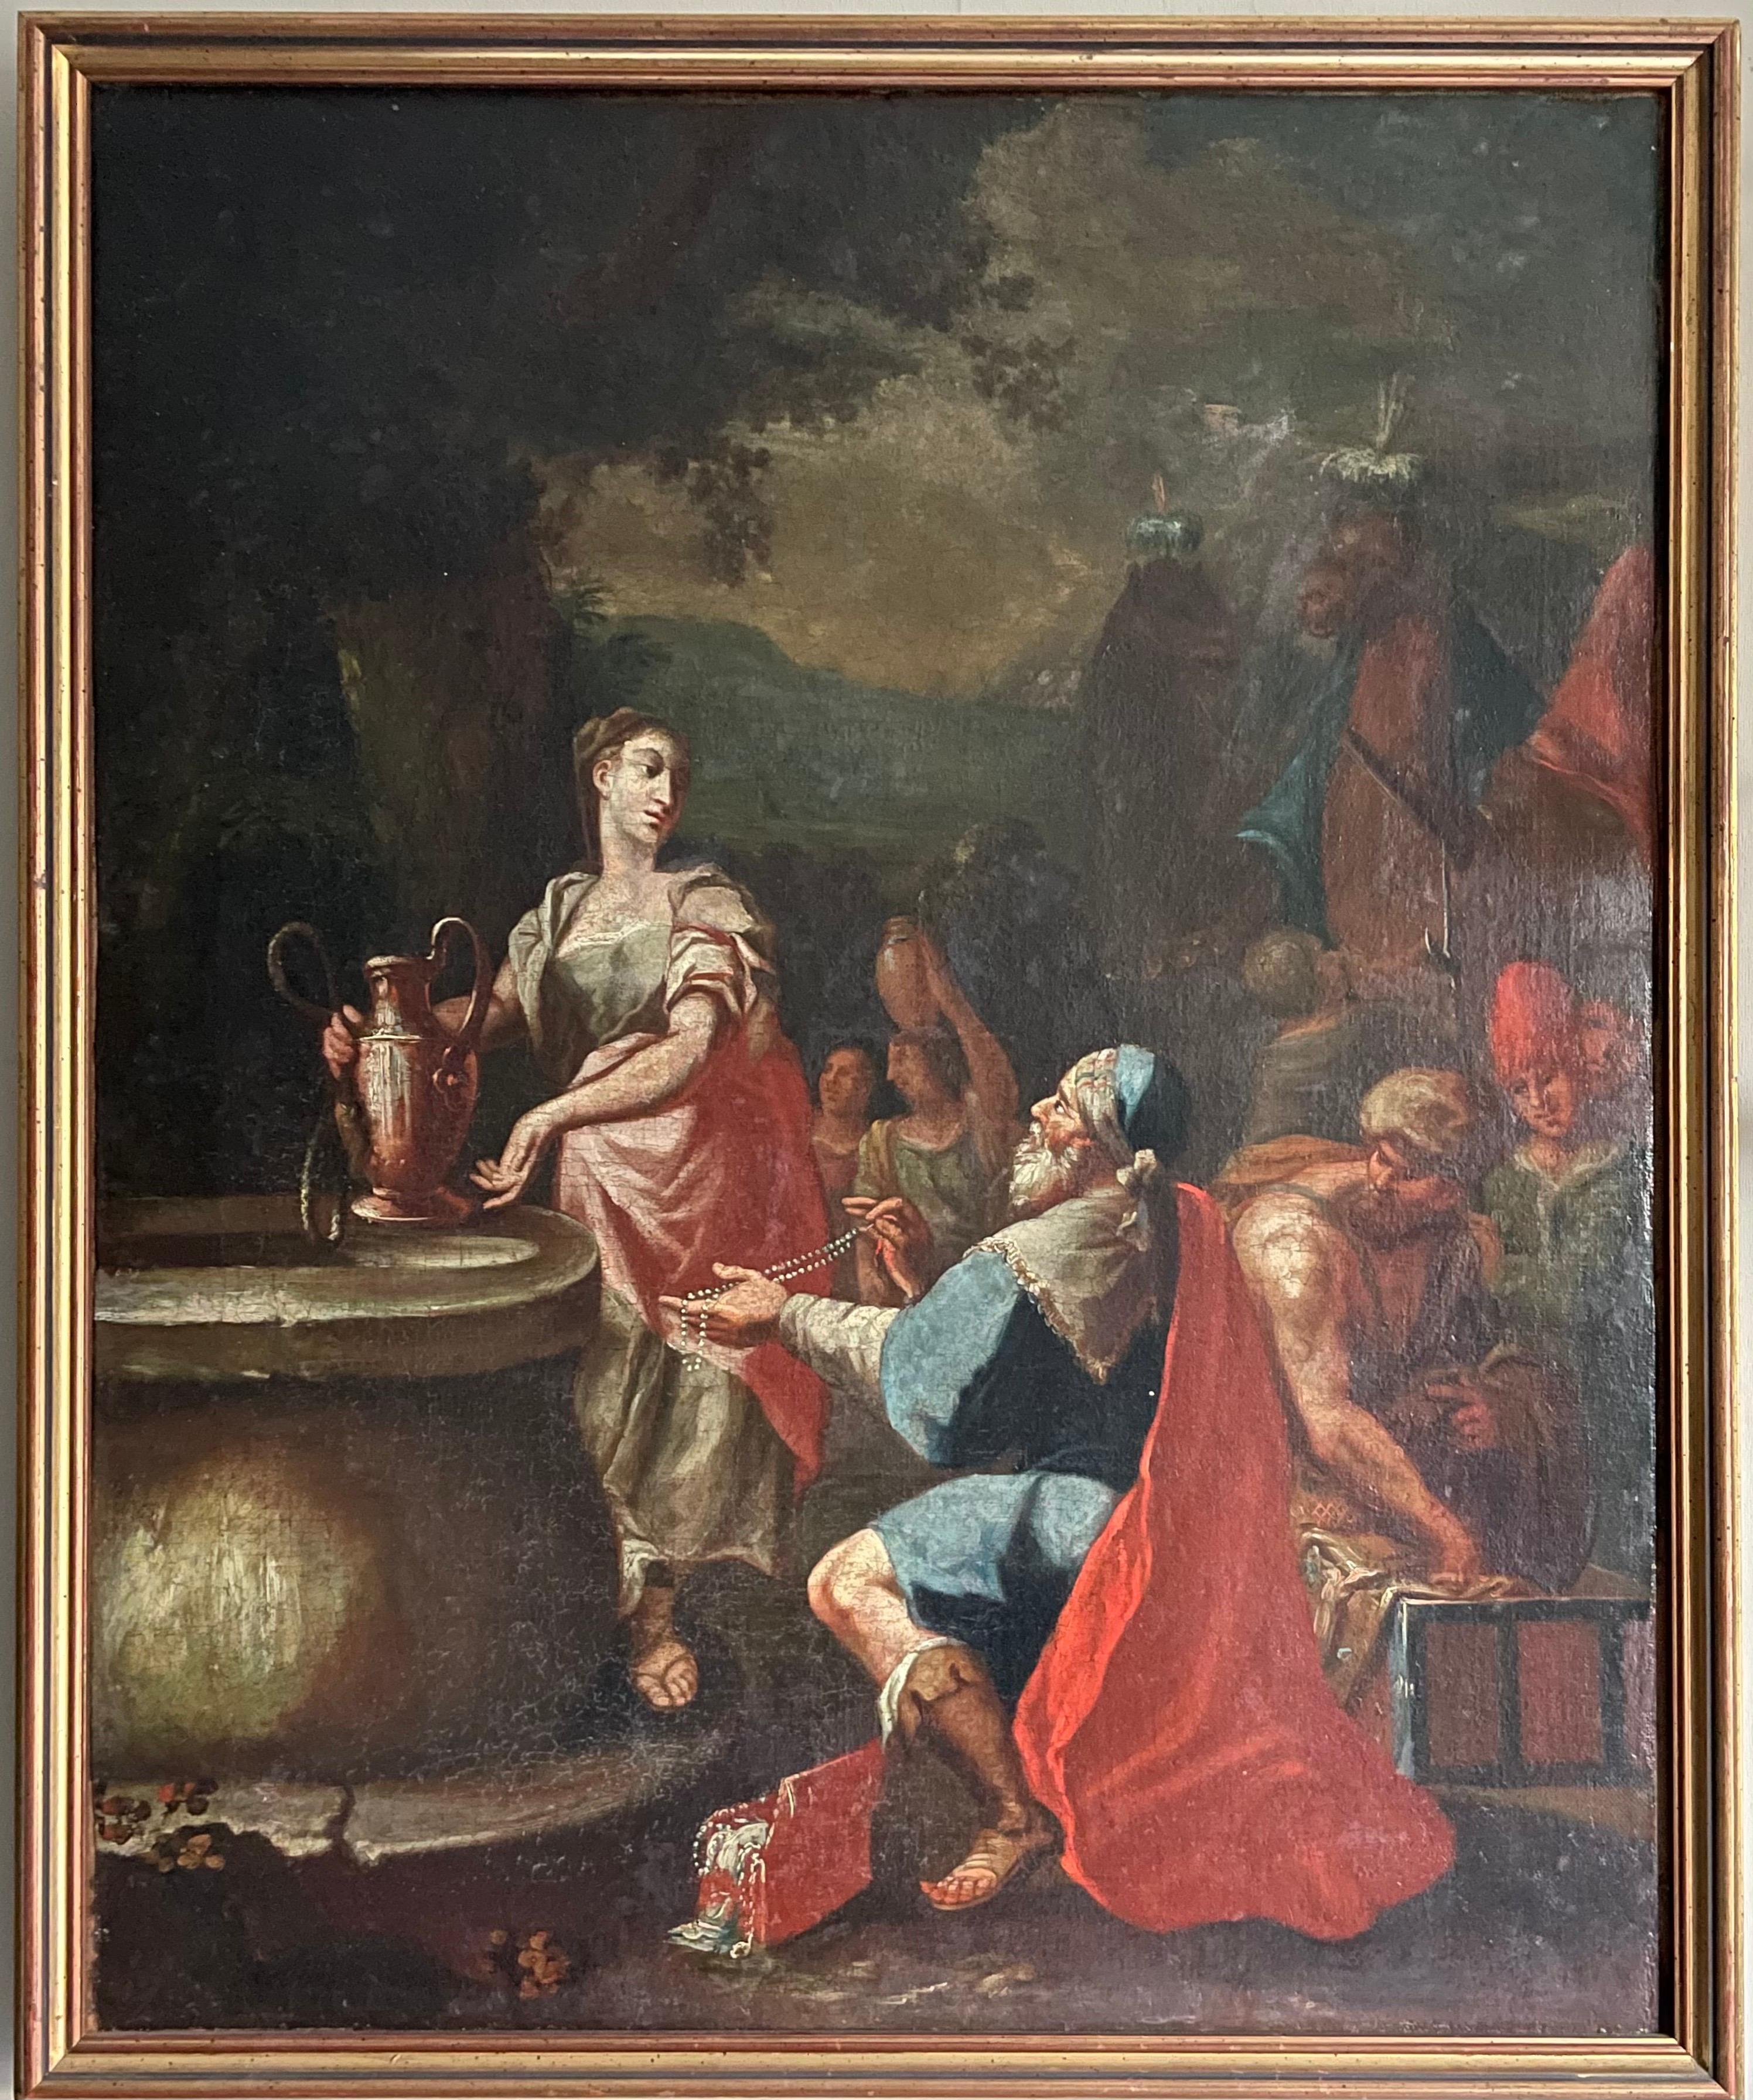 Artist/ School: Italian School dating to the early 1700's. The work is close to the Venetian artist, Giovanni Battista Pittoni (Italian 1687-1767).

Title: Rebecca and Eliezer at the Well. Painted with fine detailing throughout.

Medium: oil